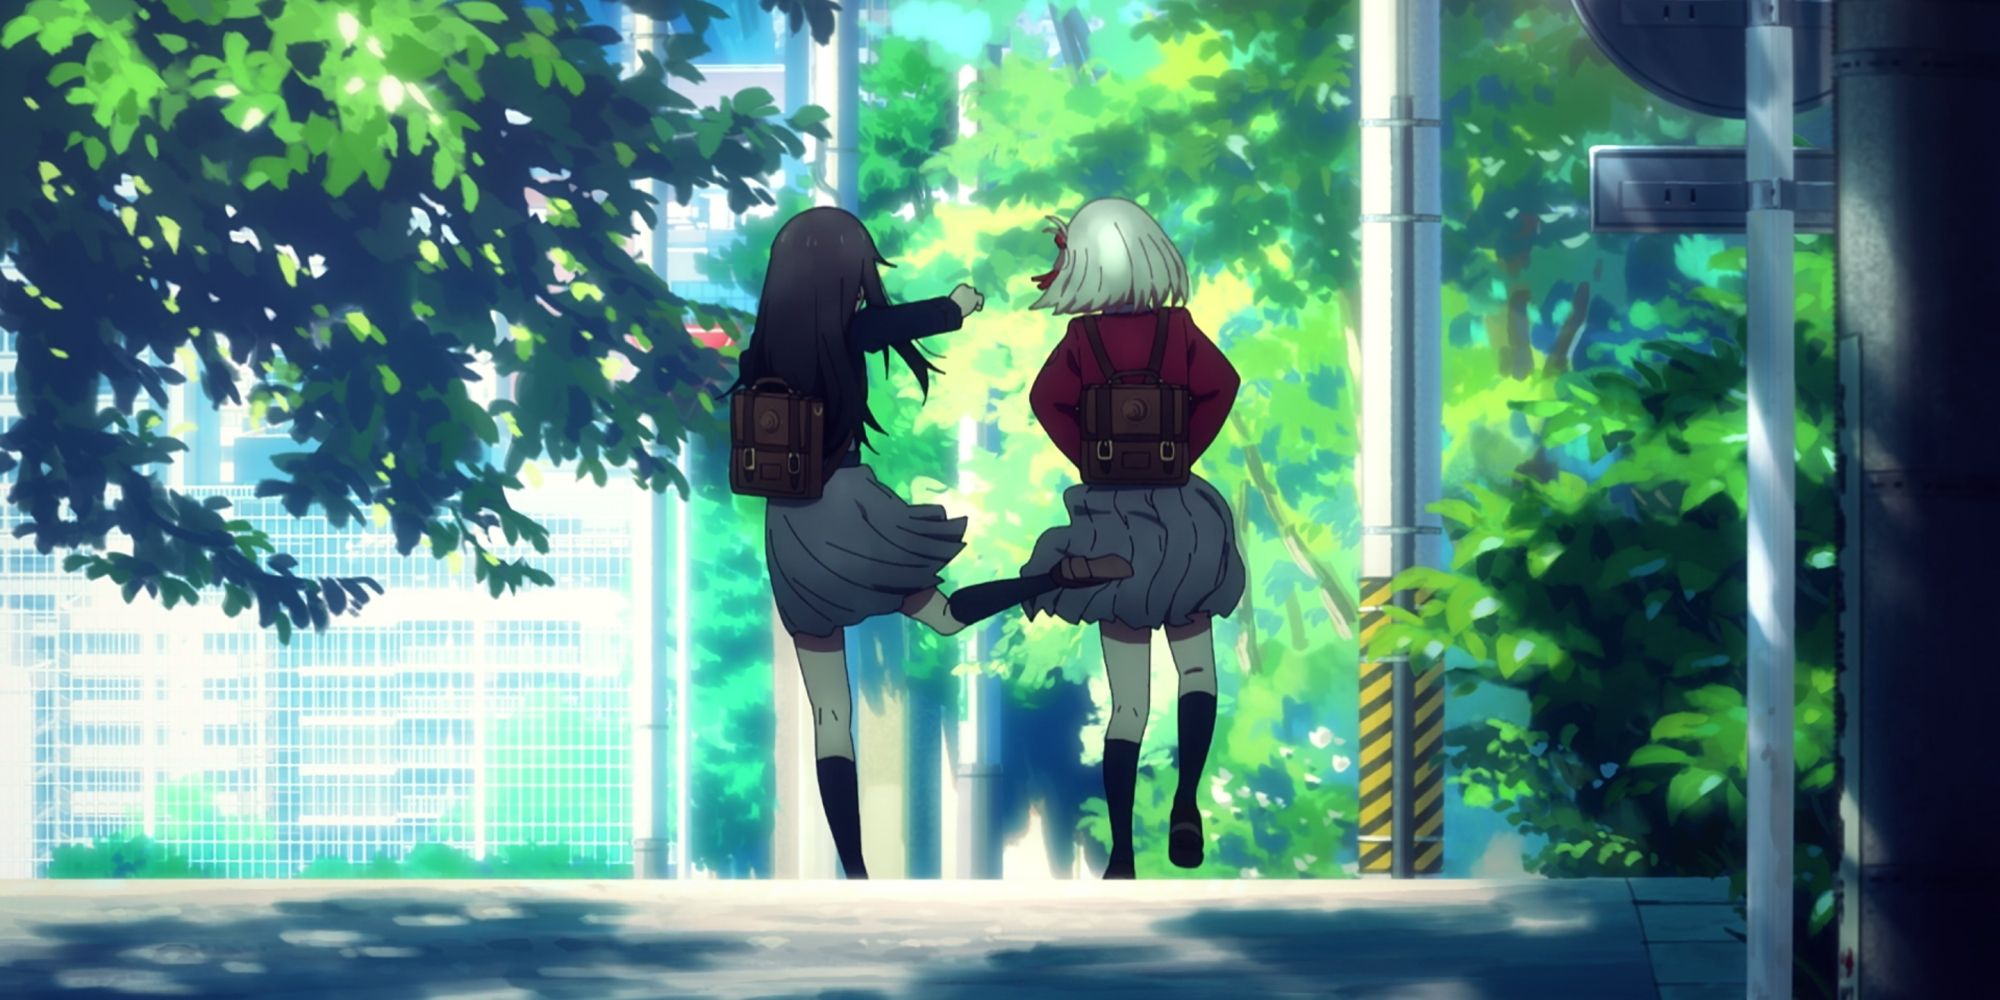 Takina kicks Chisato from behind in Lycoris Recoil's opening credits sequence.